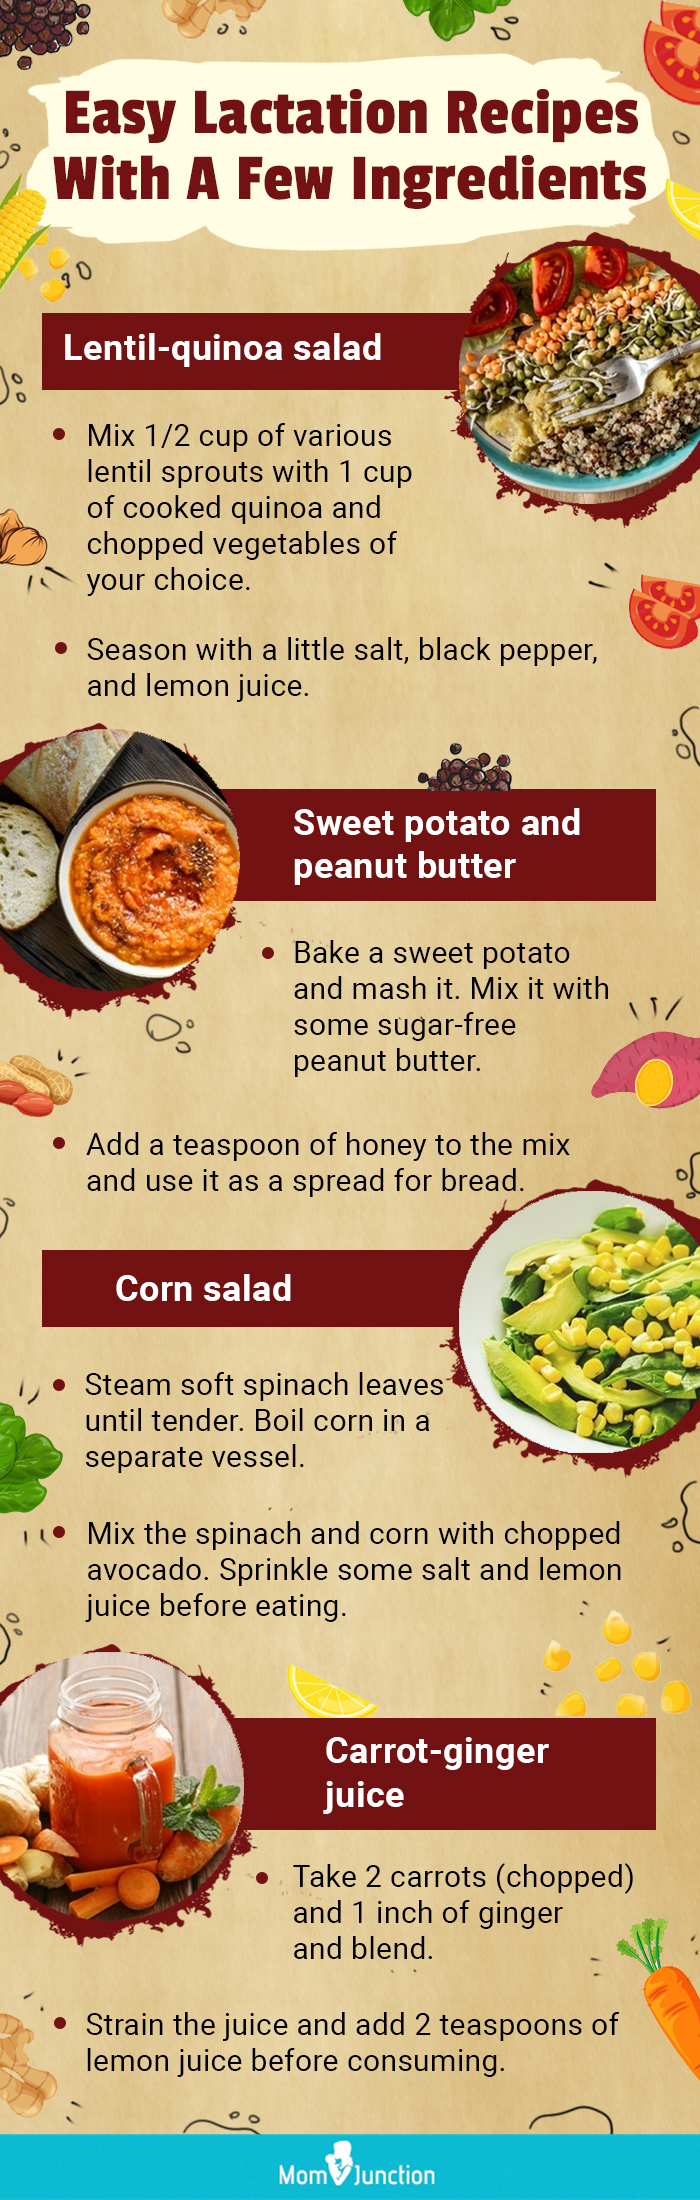 easy lactation recipes with a few ingredients (infographic)